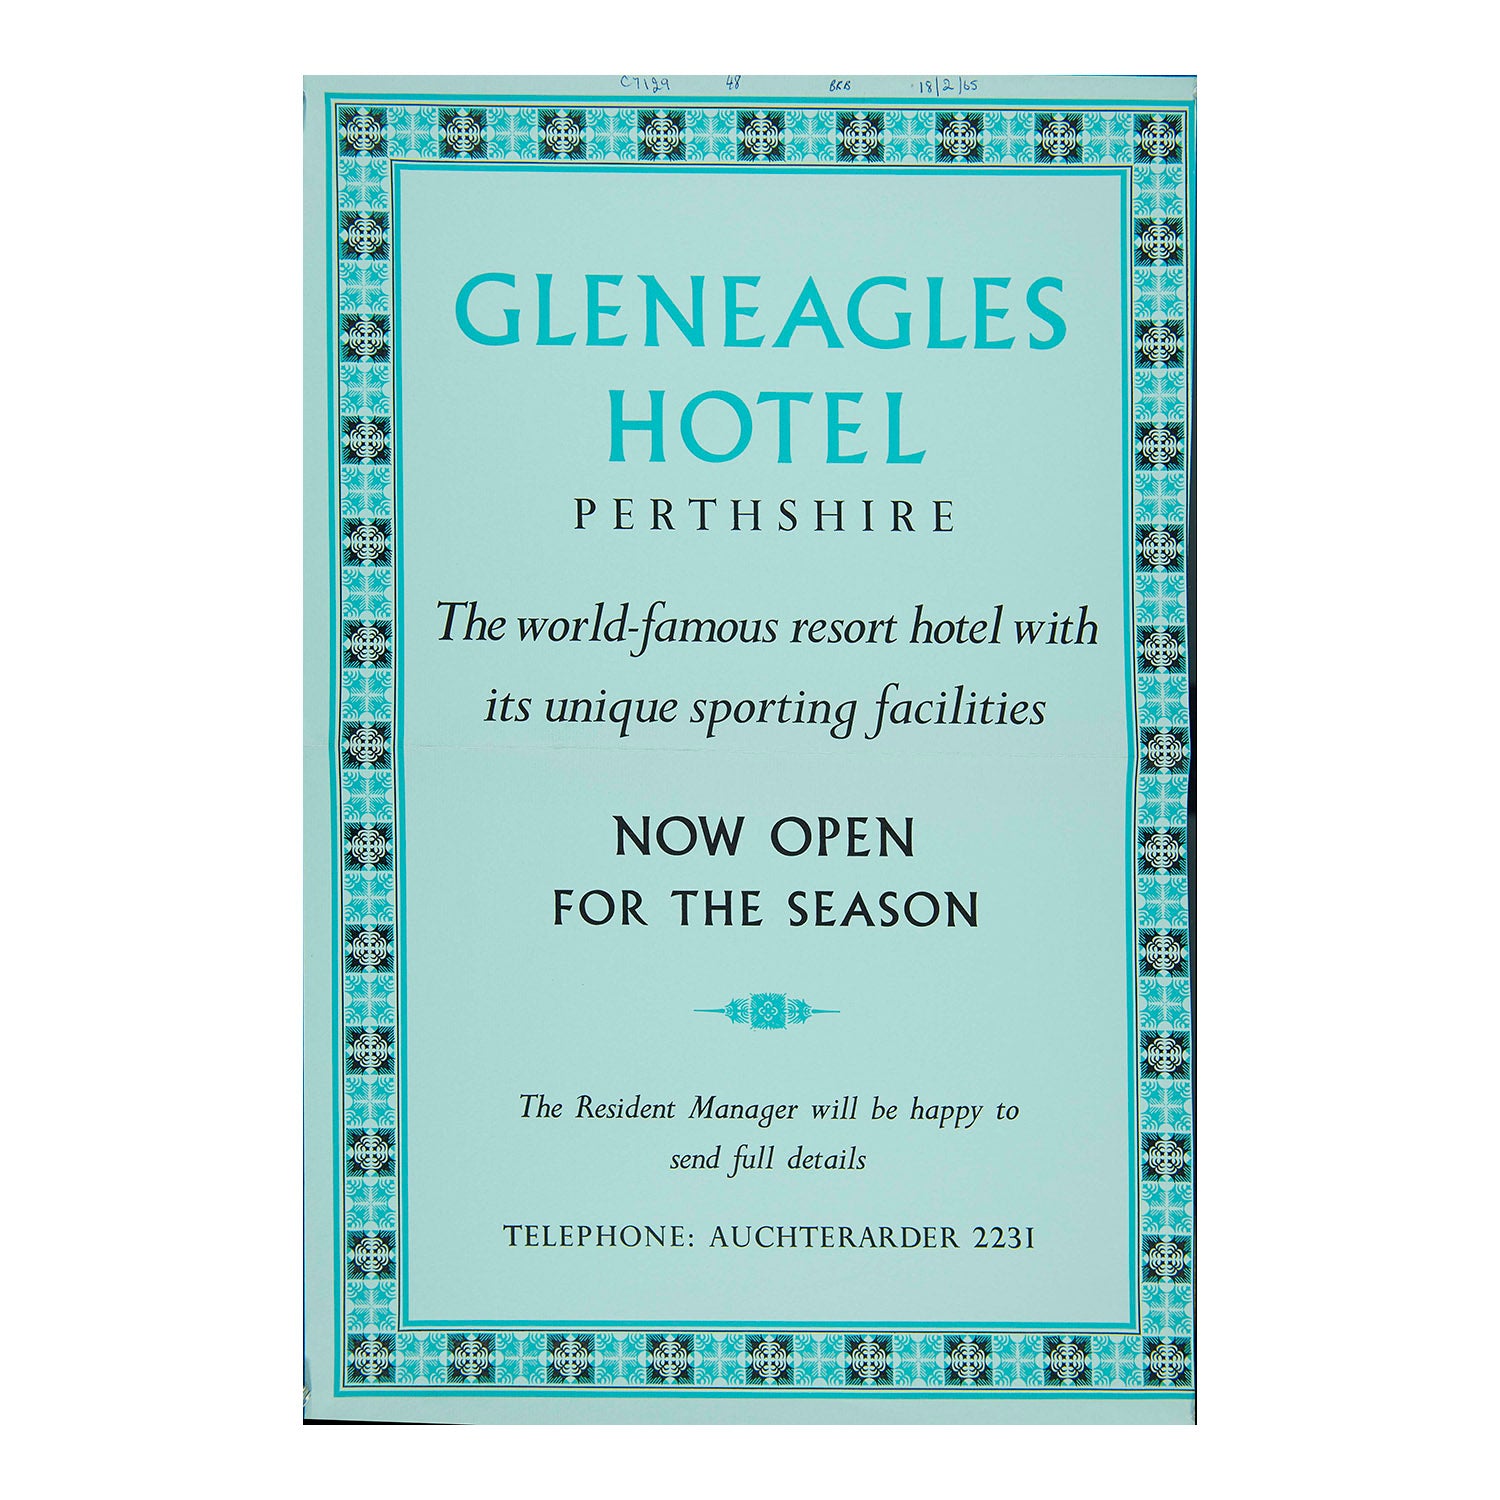 poster for the famous Gleneagles Hotel and golf resort, near Auchterarder, Scotland, 1965. The poster, with decorative border designed in-house at the Curwen Press, promotes “The world-famous resort hotel with its unique sporting facilities”